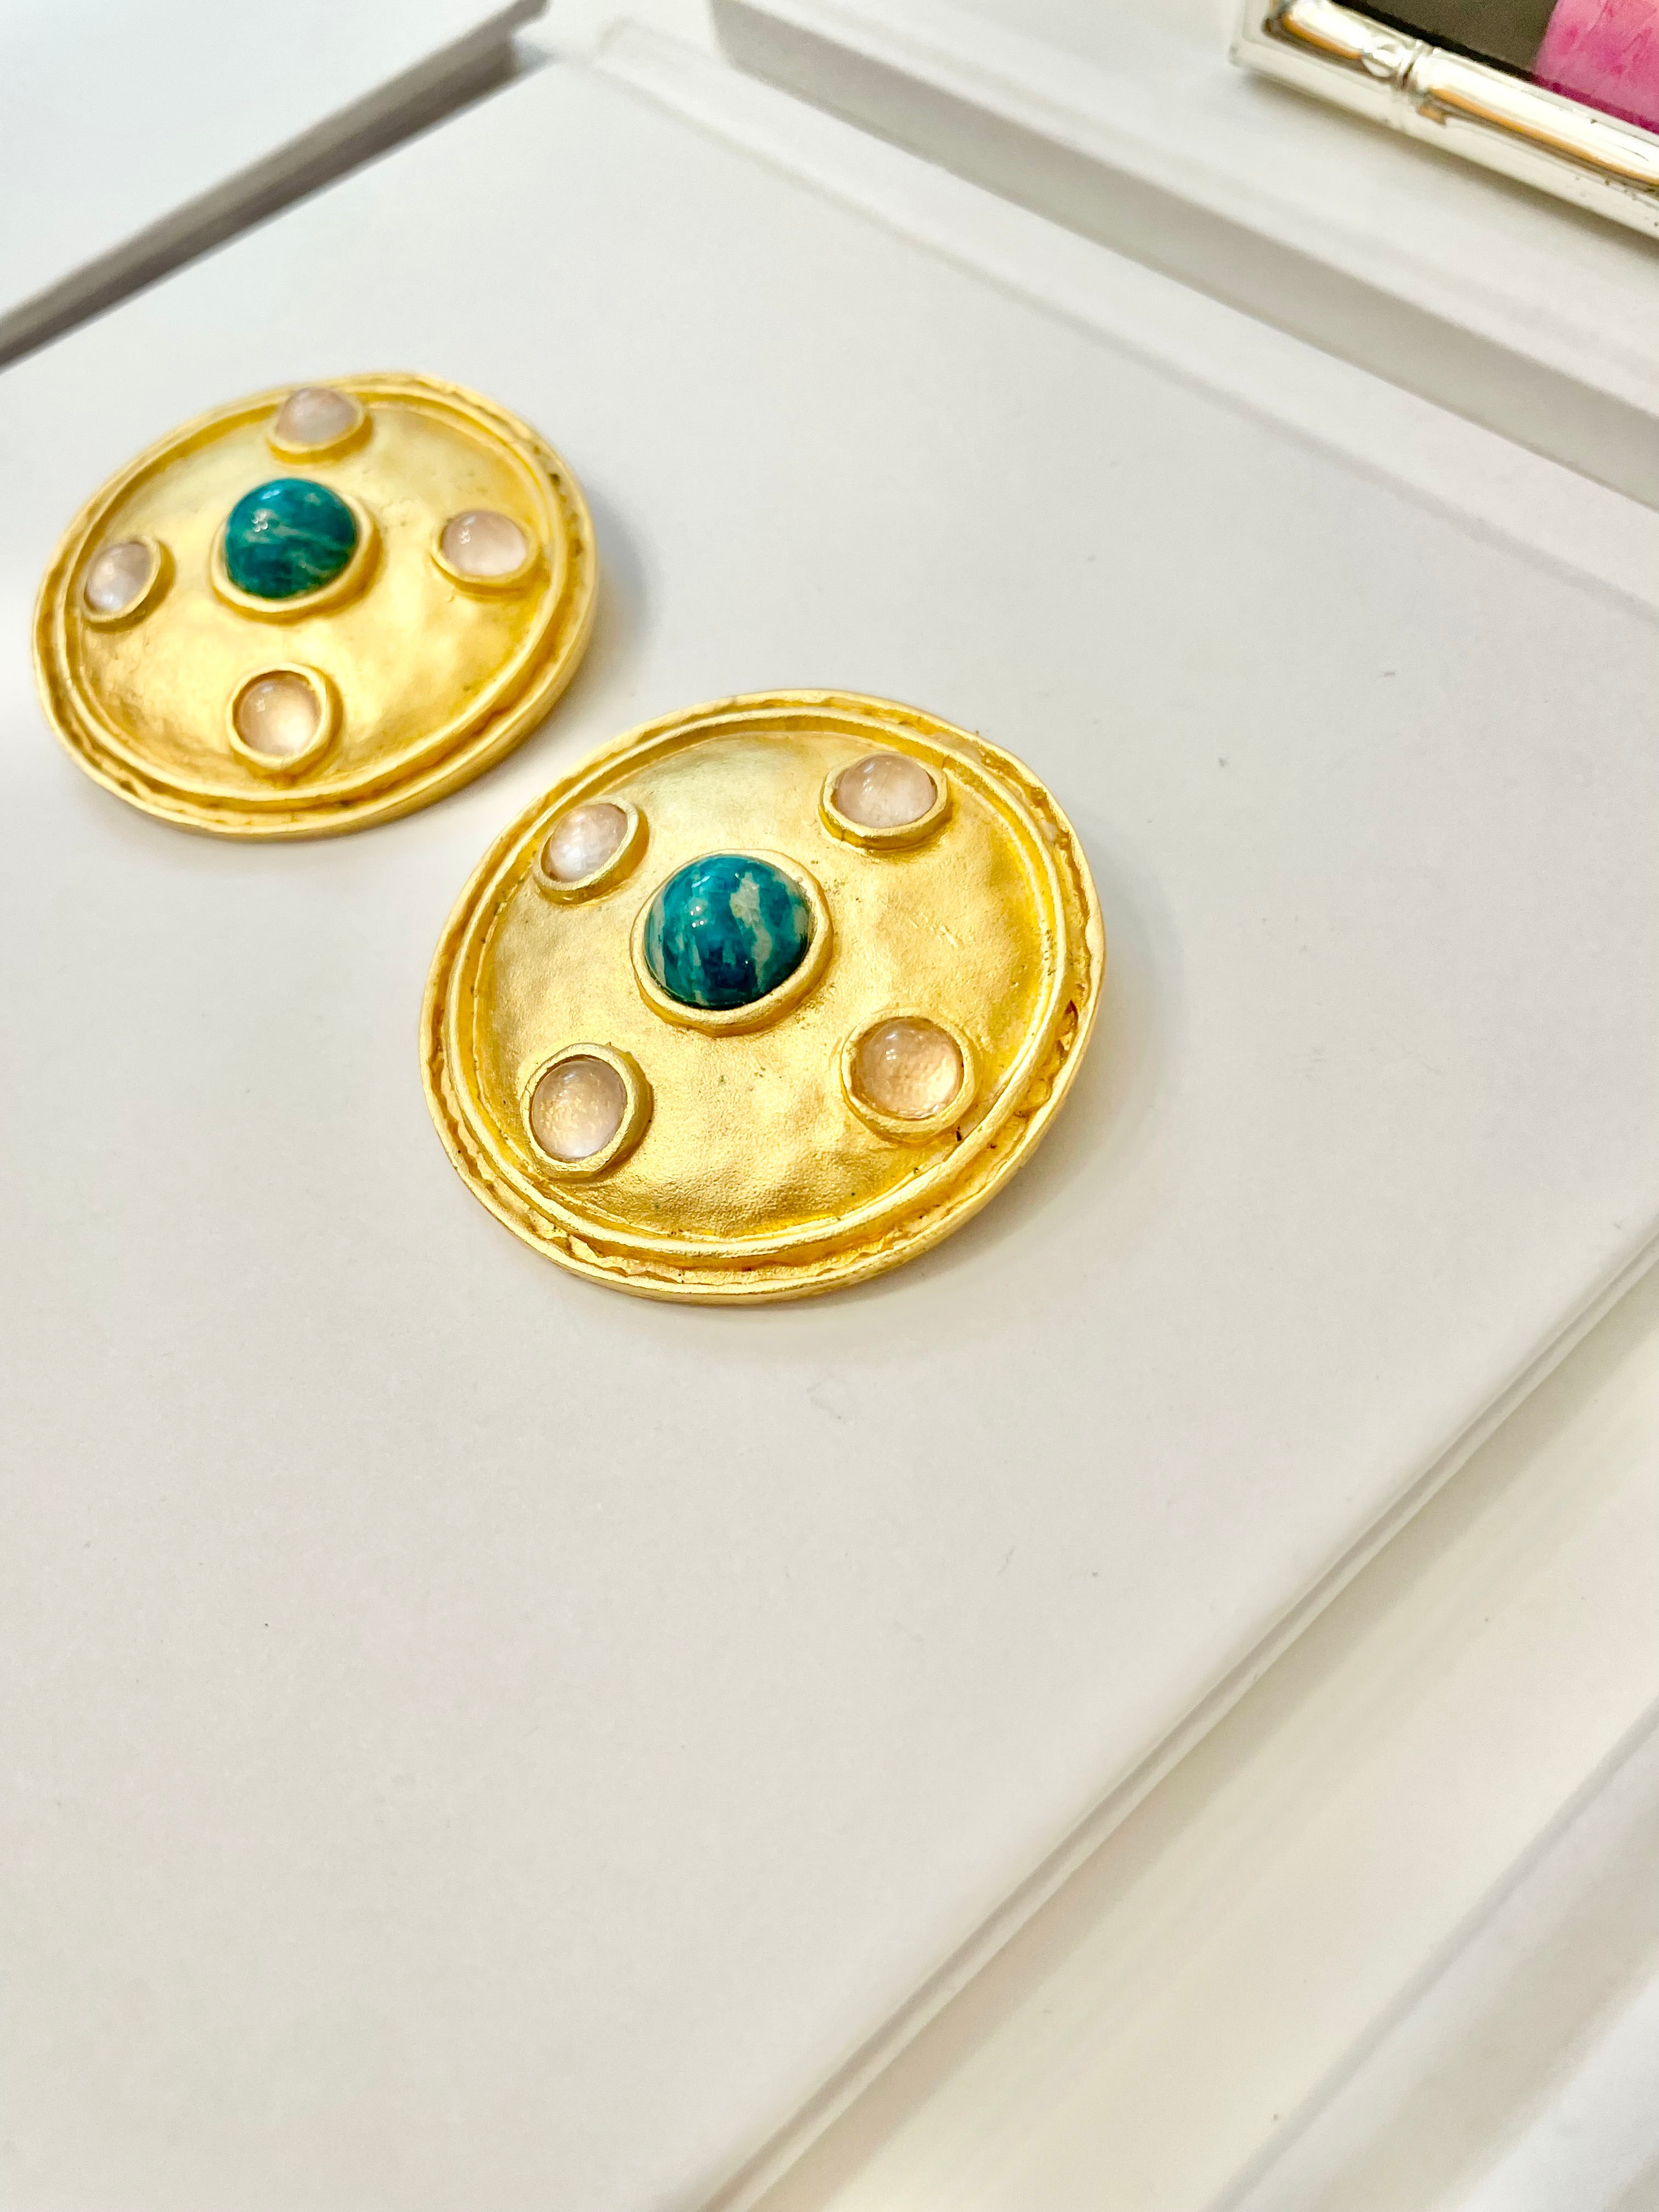 The Socialite and her love affair with the classic gold button earrings! So elegant